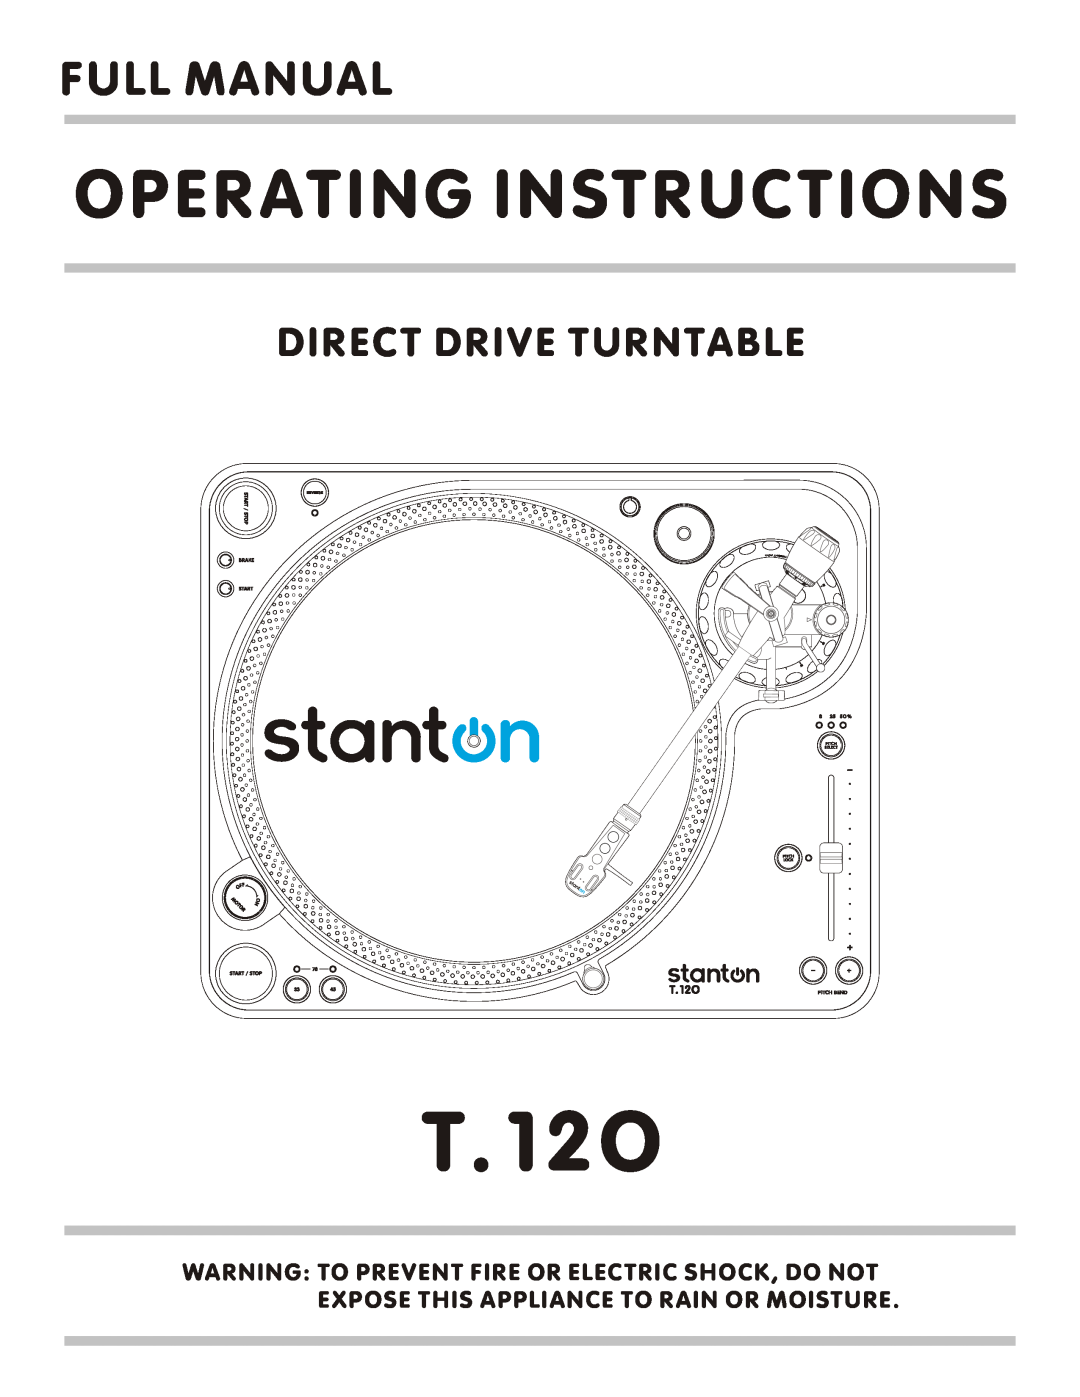 Stanton T.12O manual Operating Instructions, Full Manual, Direct Drive Turntable 